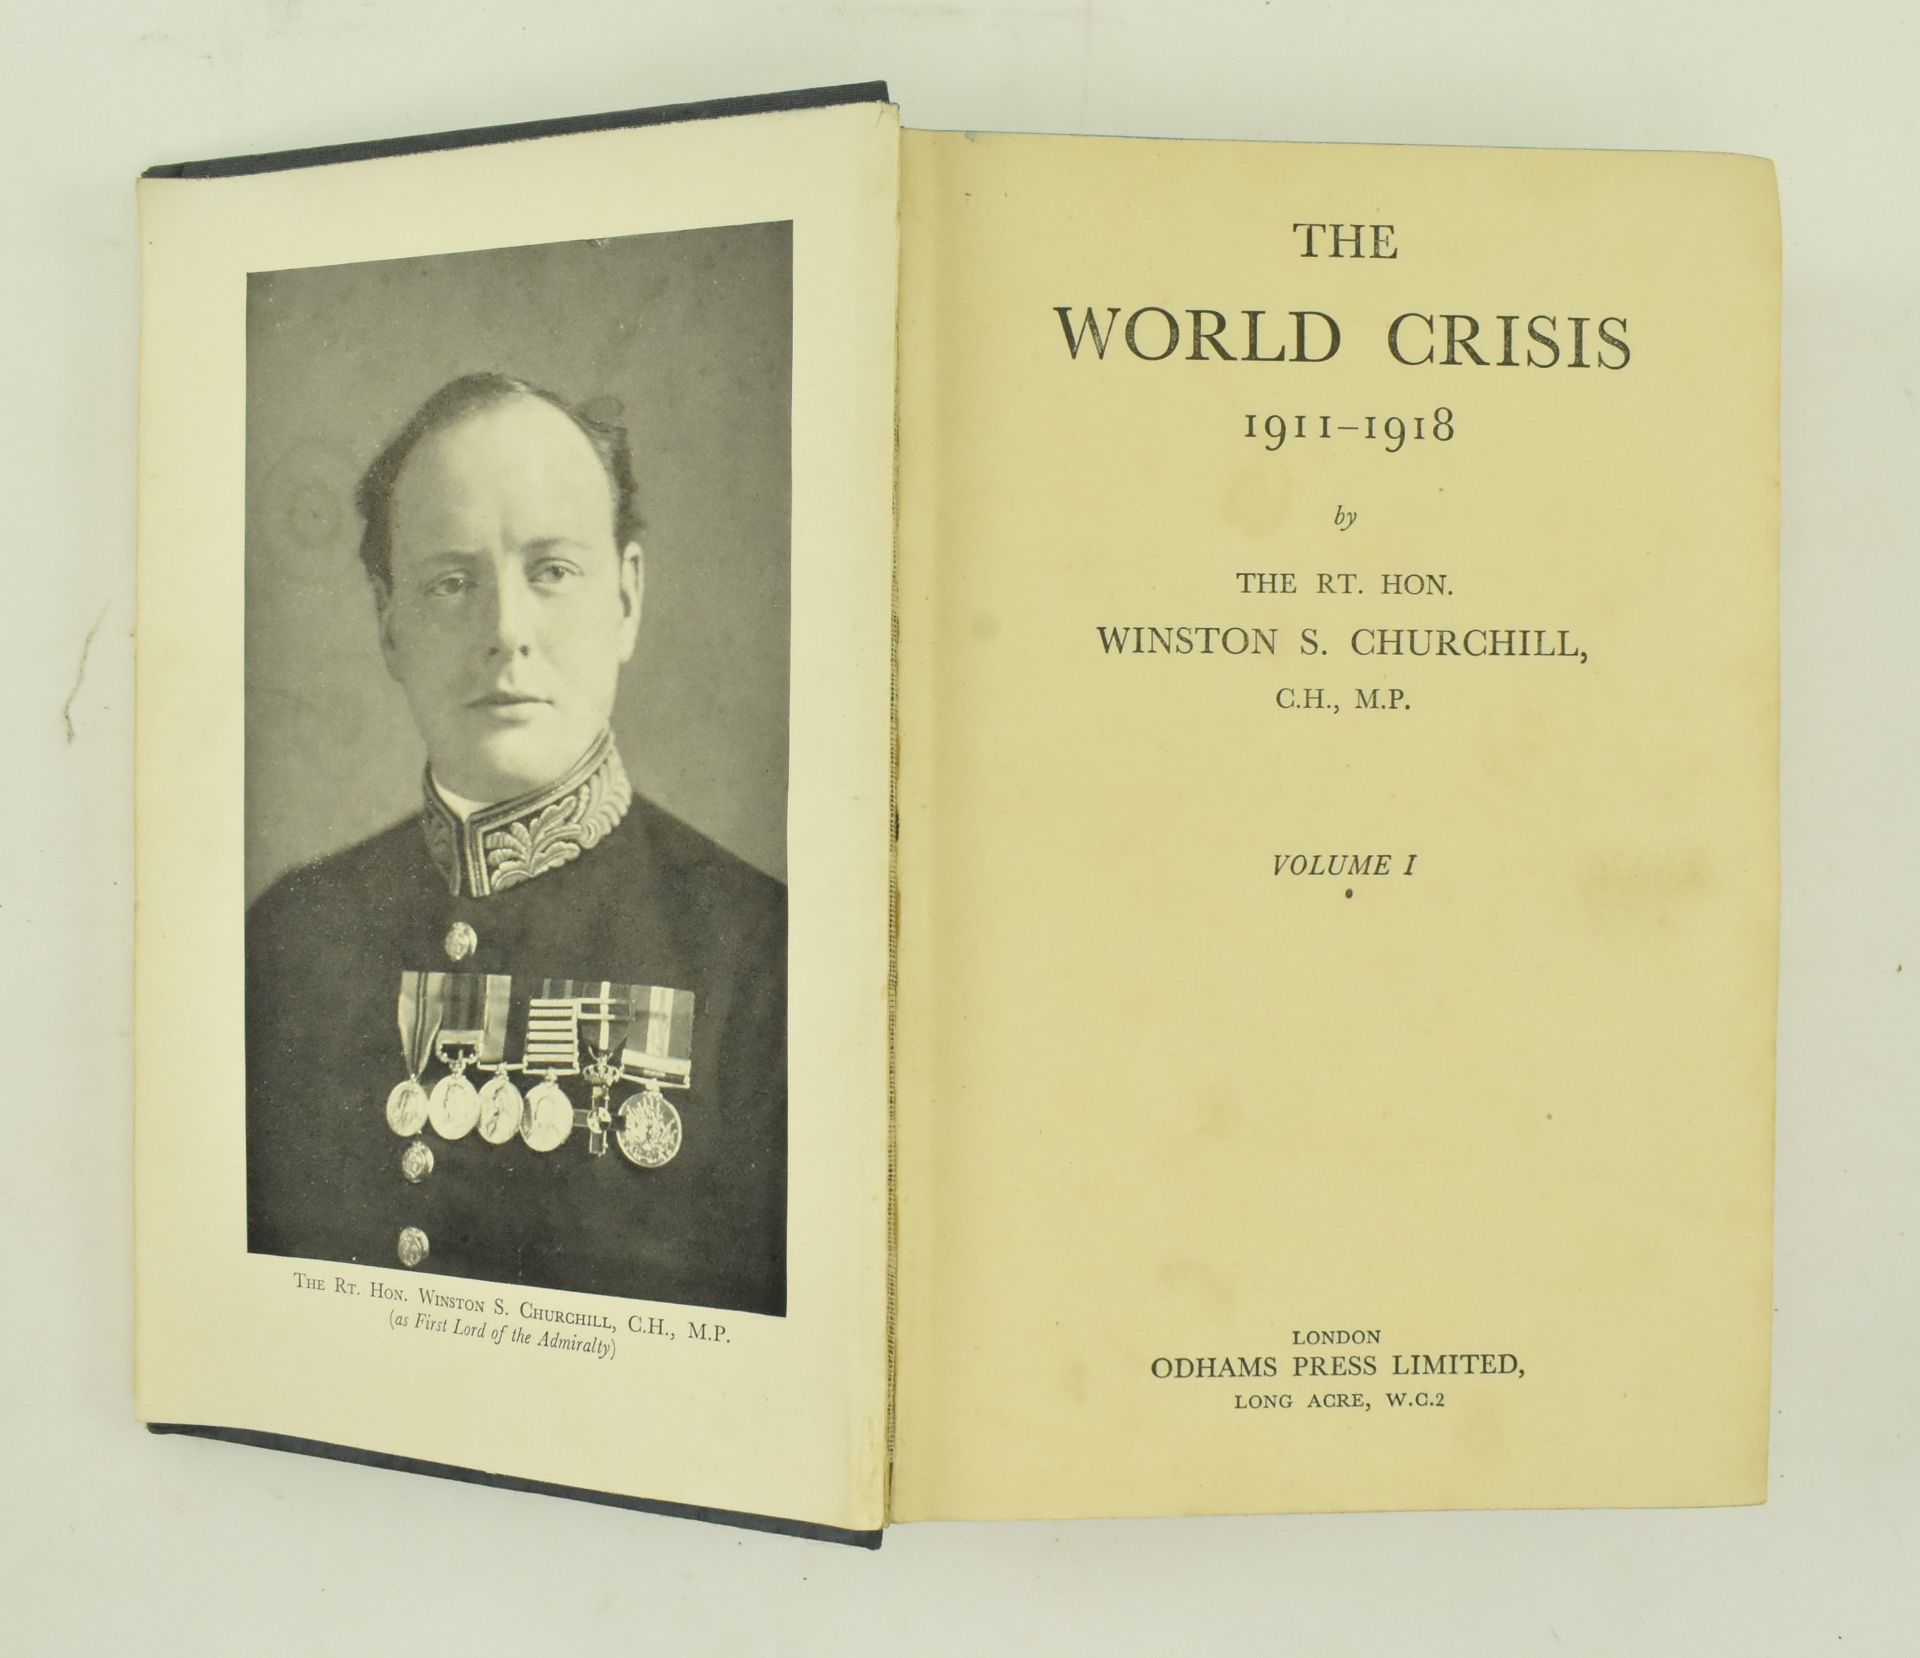 WWI INTEREST. COLLECTION OF SIX BOOKS ON THE GREAT WAR - Image 4 of 11